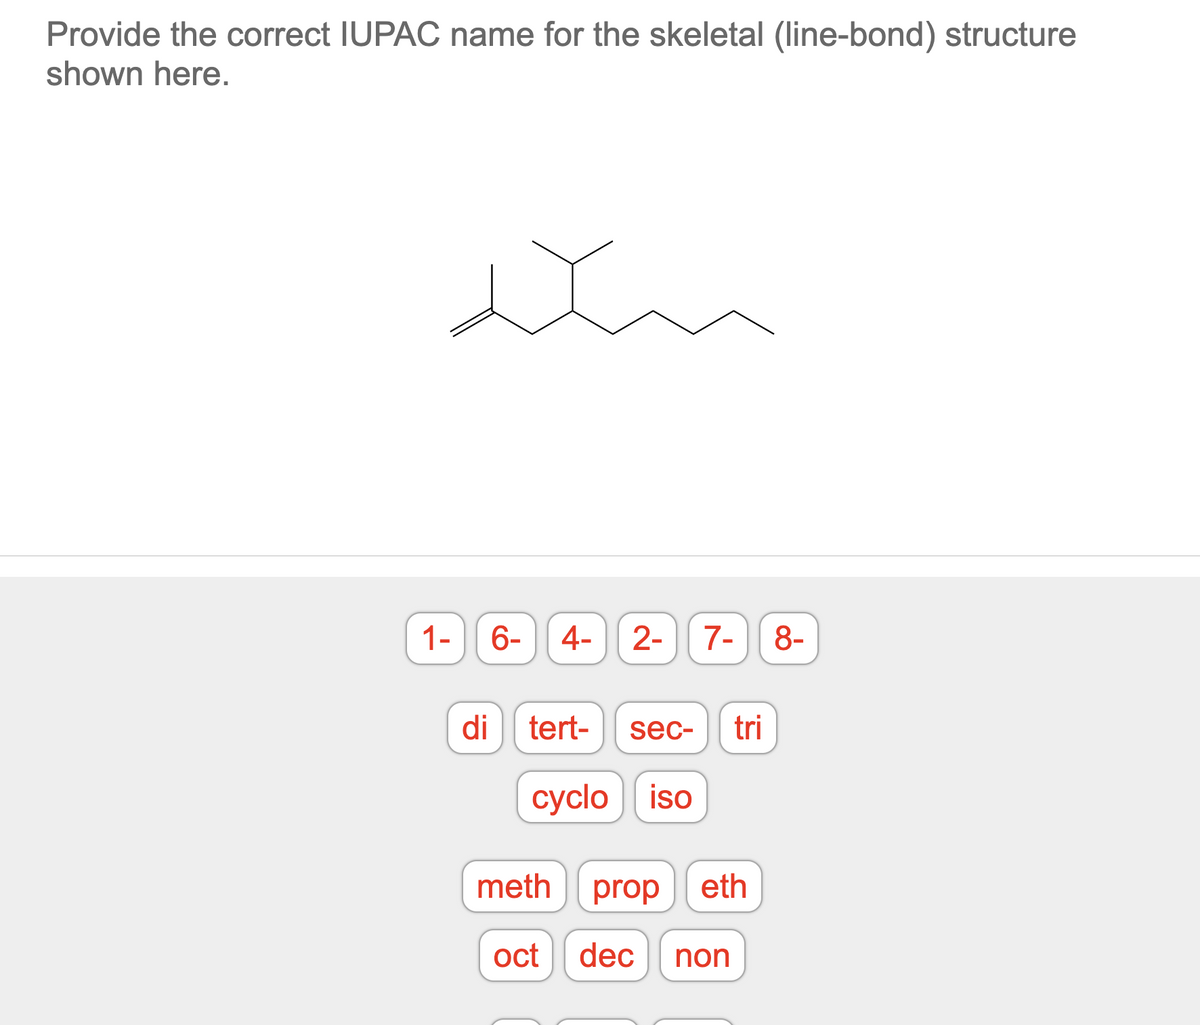 Provide the correct IUPAC name for the skeletal (line-bond) structure
shown here.
1-
6- 4- 2- 7- 8-
di tert-
sec- tri
cyclo iso
meth prop eth
oct dec non